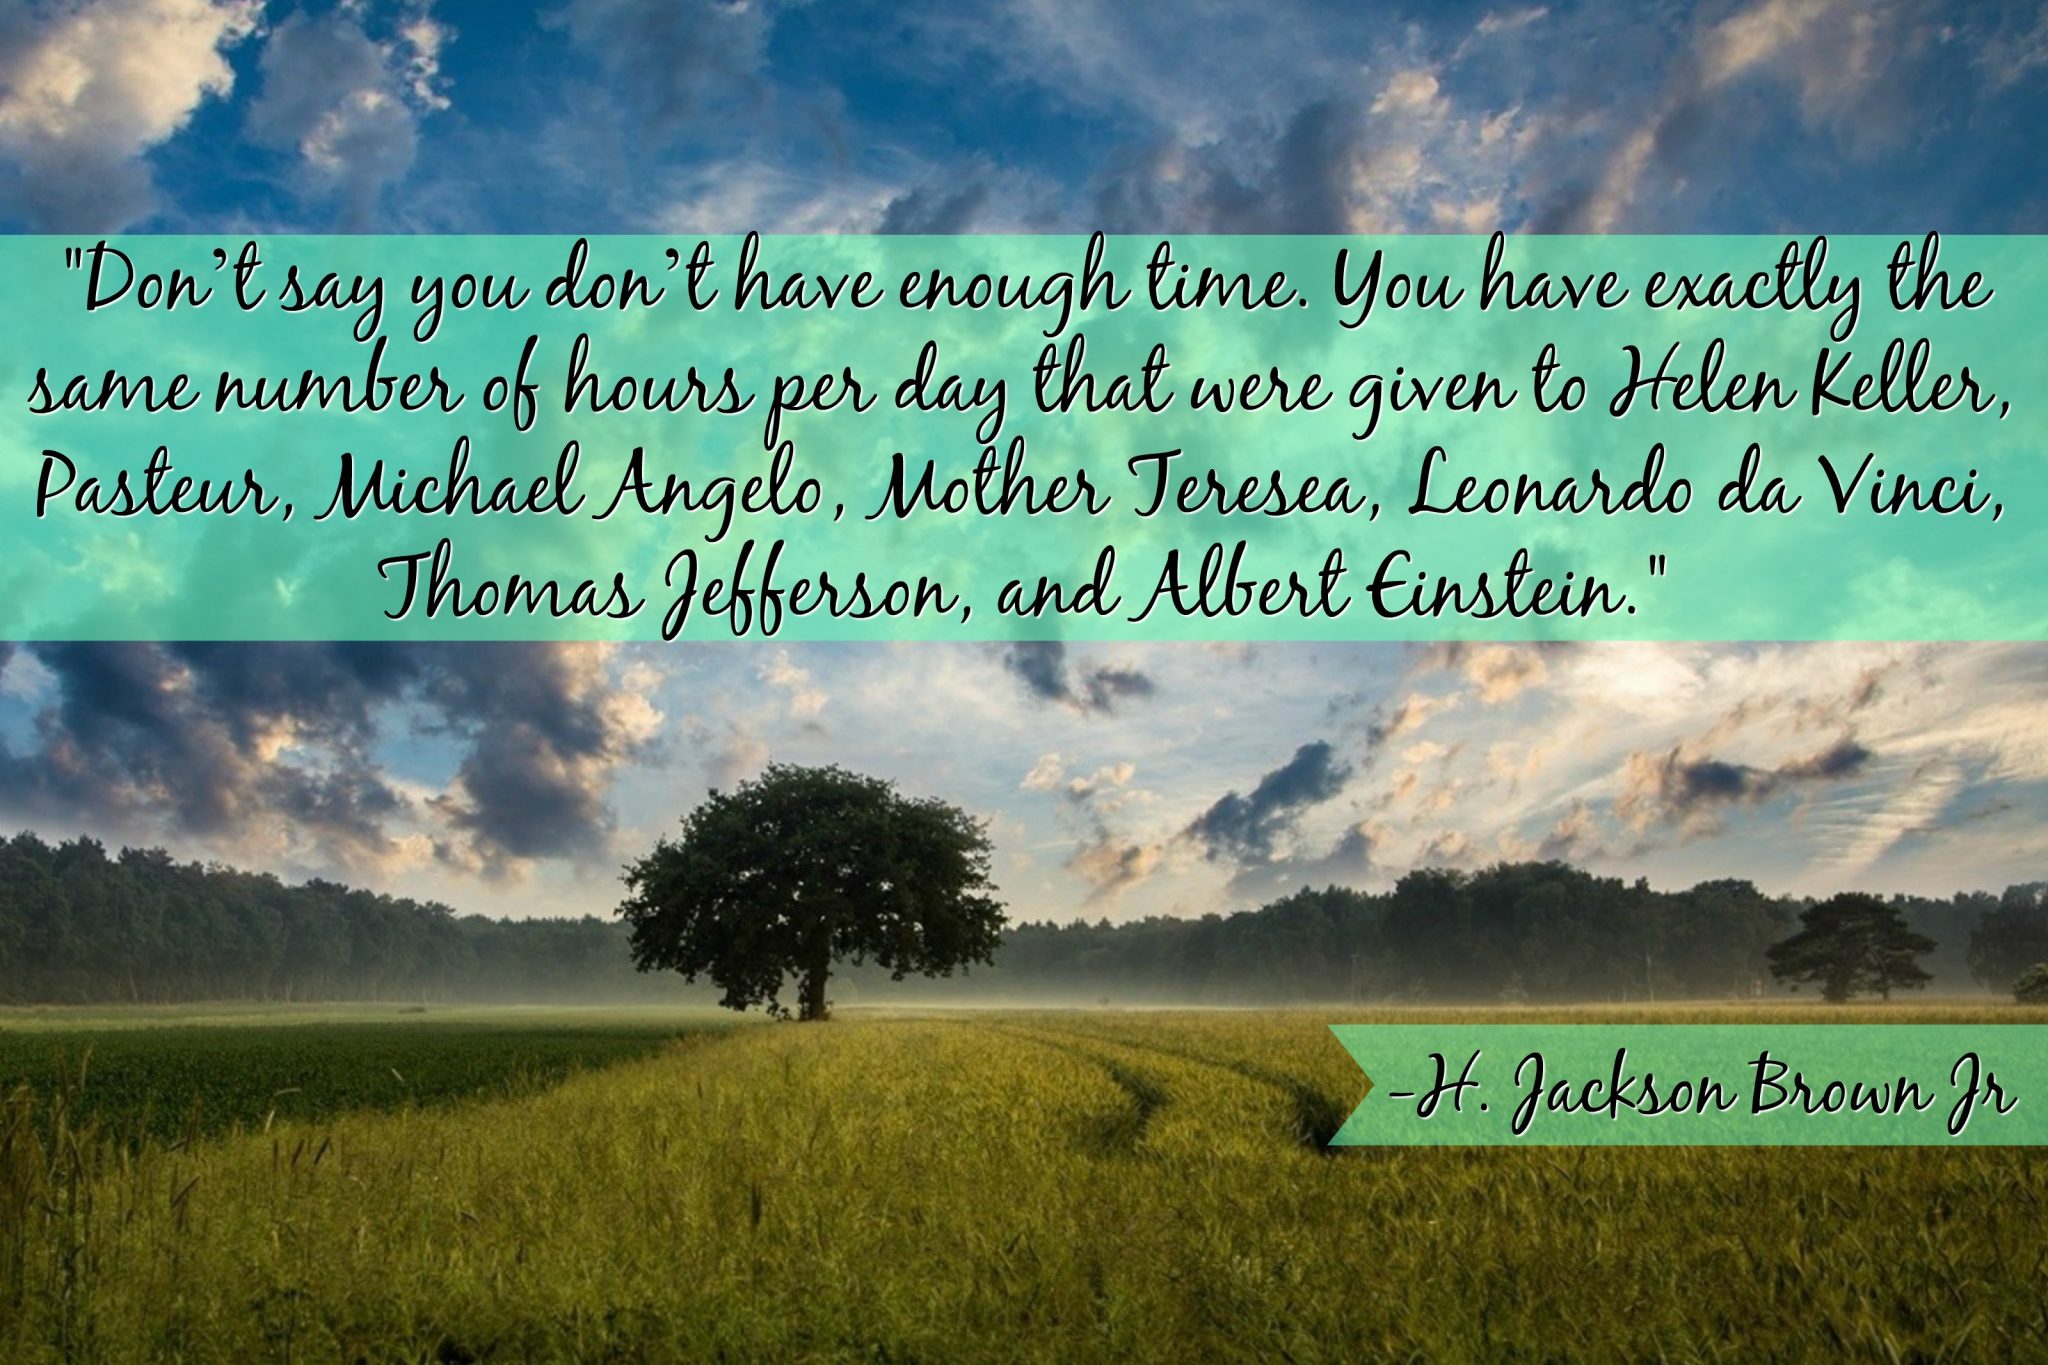 "Don’t say you don’t have enough time. You have exactly the same number of hours per day that were given to Helen Keller, Pasteur, Michael Angelo, Mother Teresea, Leonardo da Vinci, Thomas Jefferson, and Albert Einstein."- H. Jackson Brown Jr